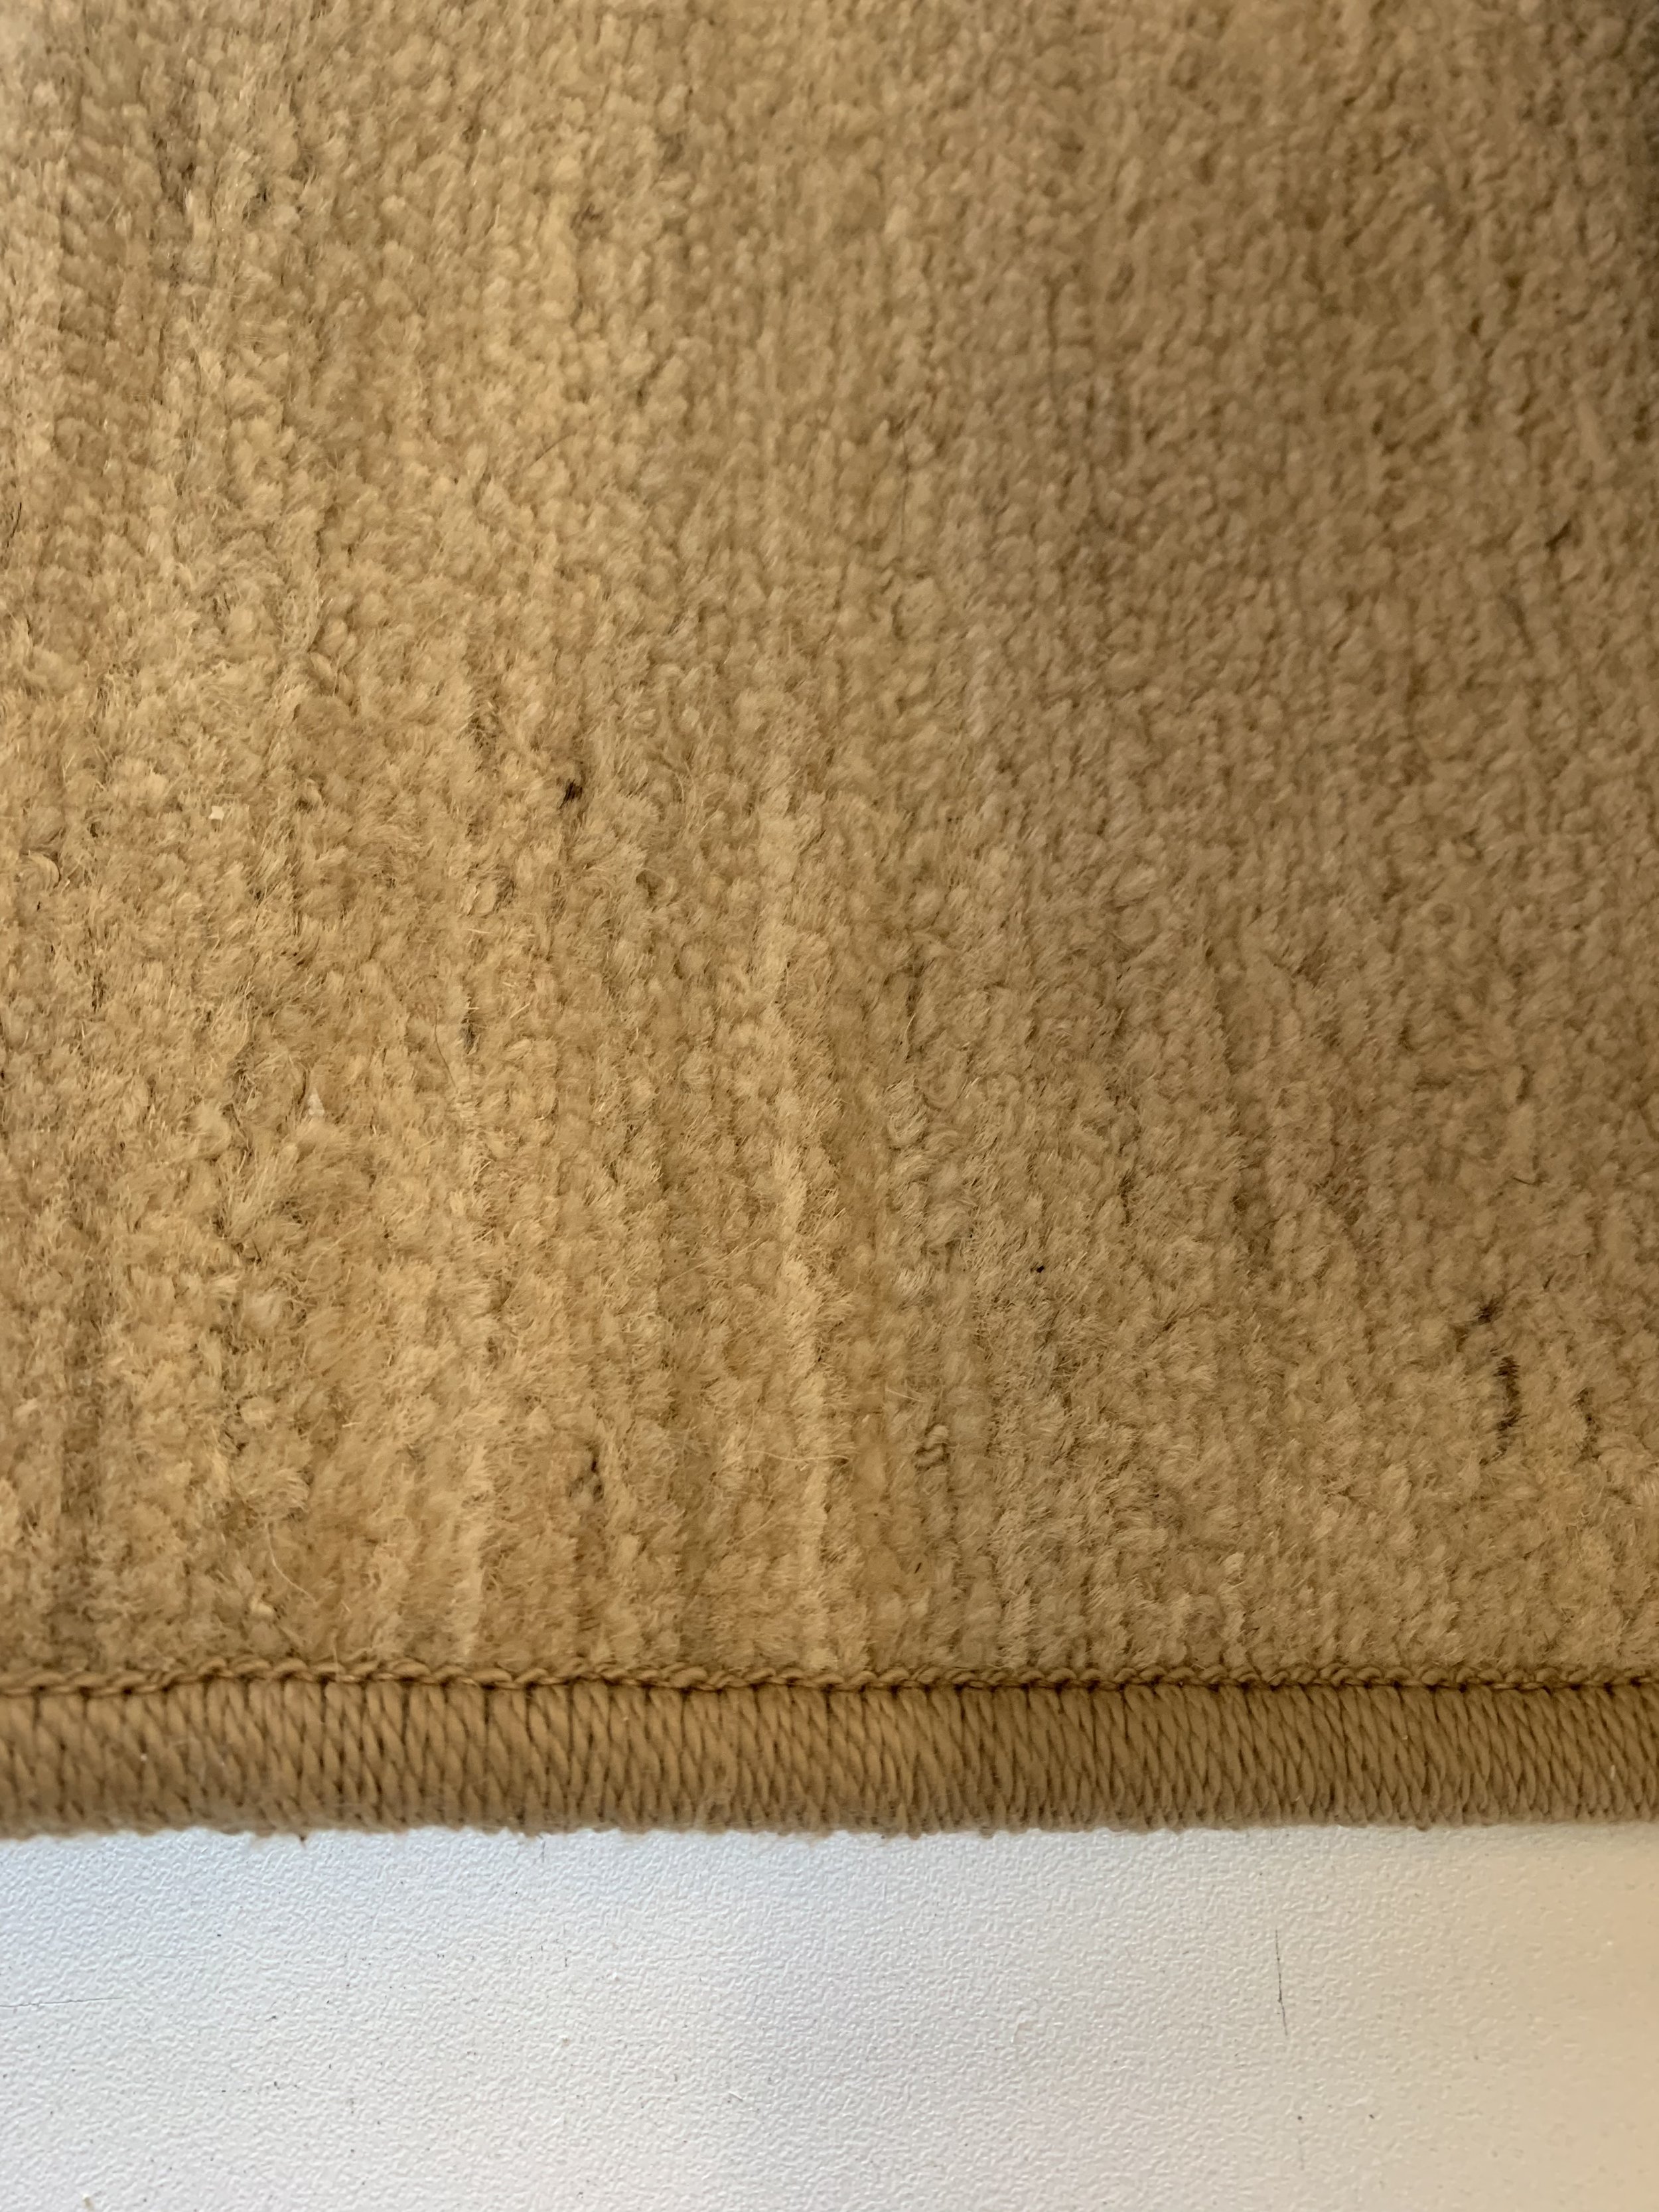 Quality Carpet Binding - East Tennessee's Carpet Binding Specialist